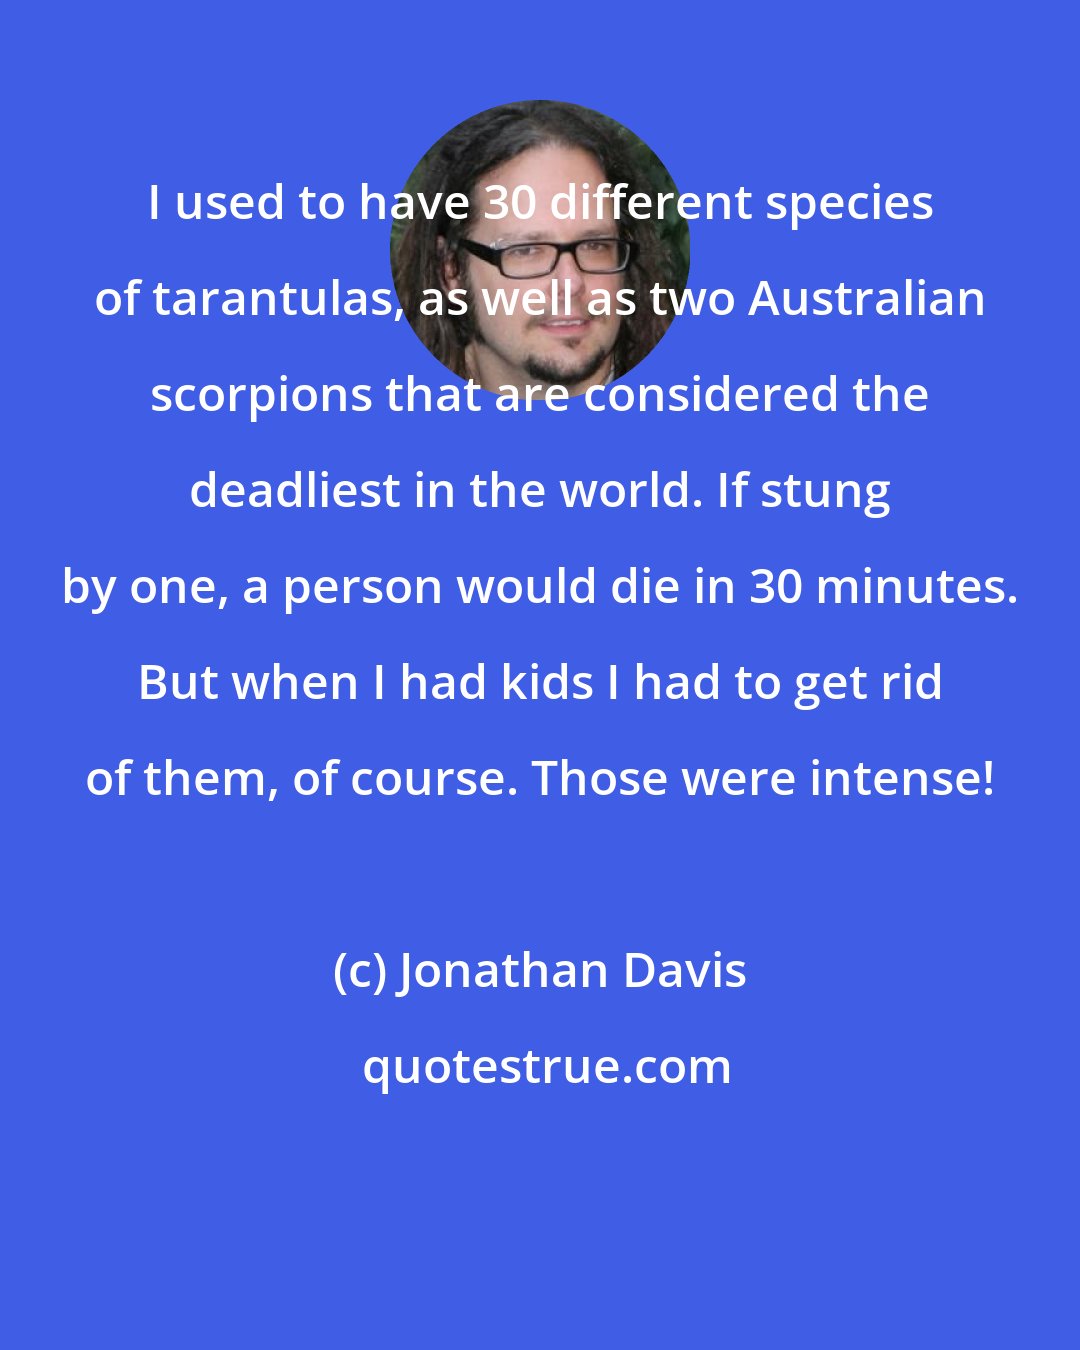 Jonathan Davis: I used to have 30 different species of tarantulas, as well as two Australian scorpions that are considered the deadliest in the world. If stung by one, a person would die in 30 minutes. But when I had kids I had to get rid of them, of course. Those were intense!